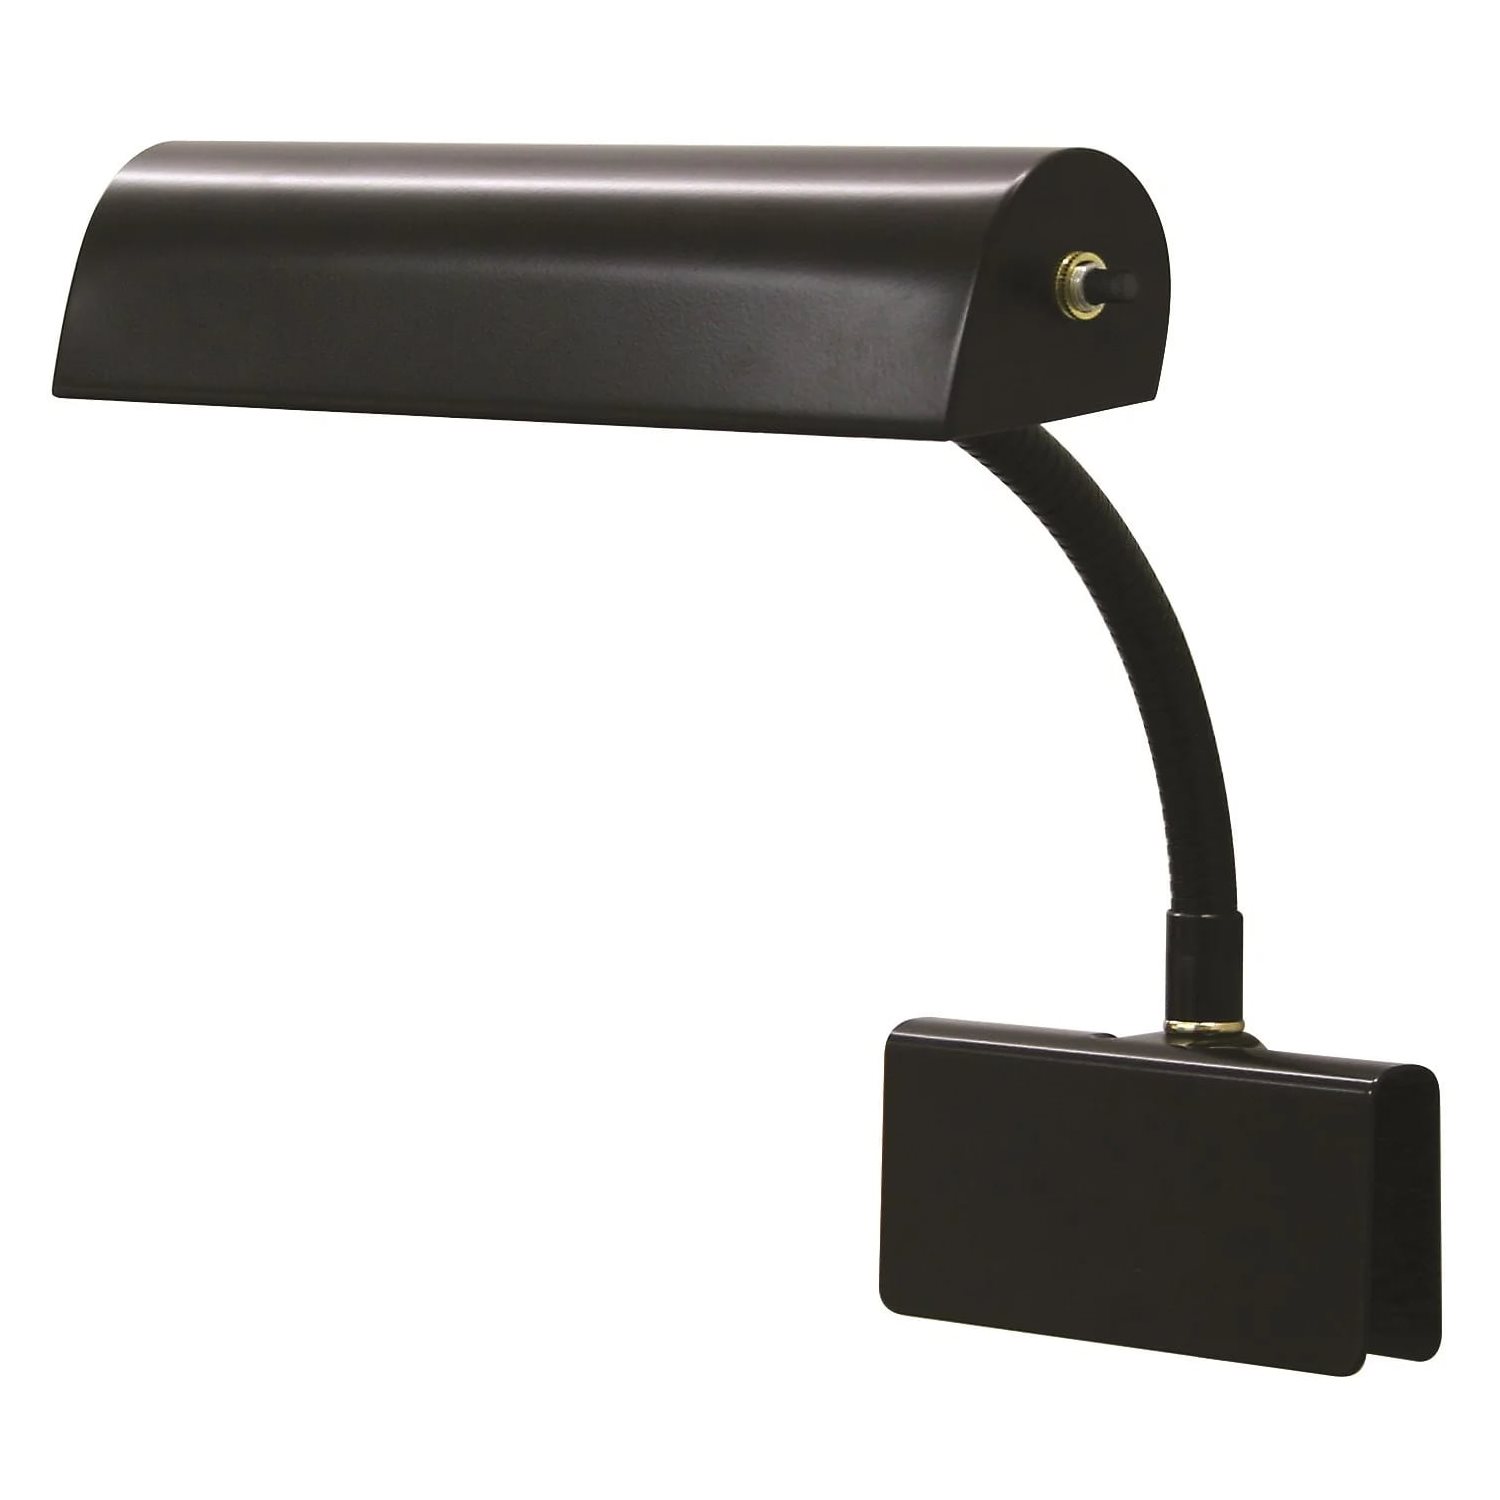 HOUSE OF TROY - GP10-7 - Grand Piand clamp Lamp - 10'' - Black